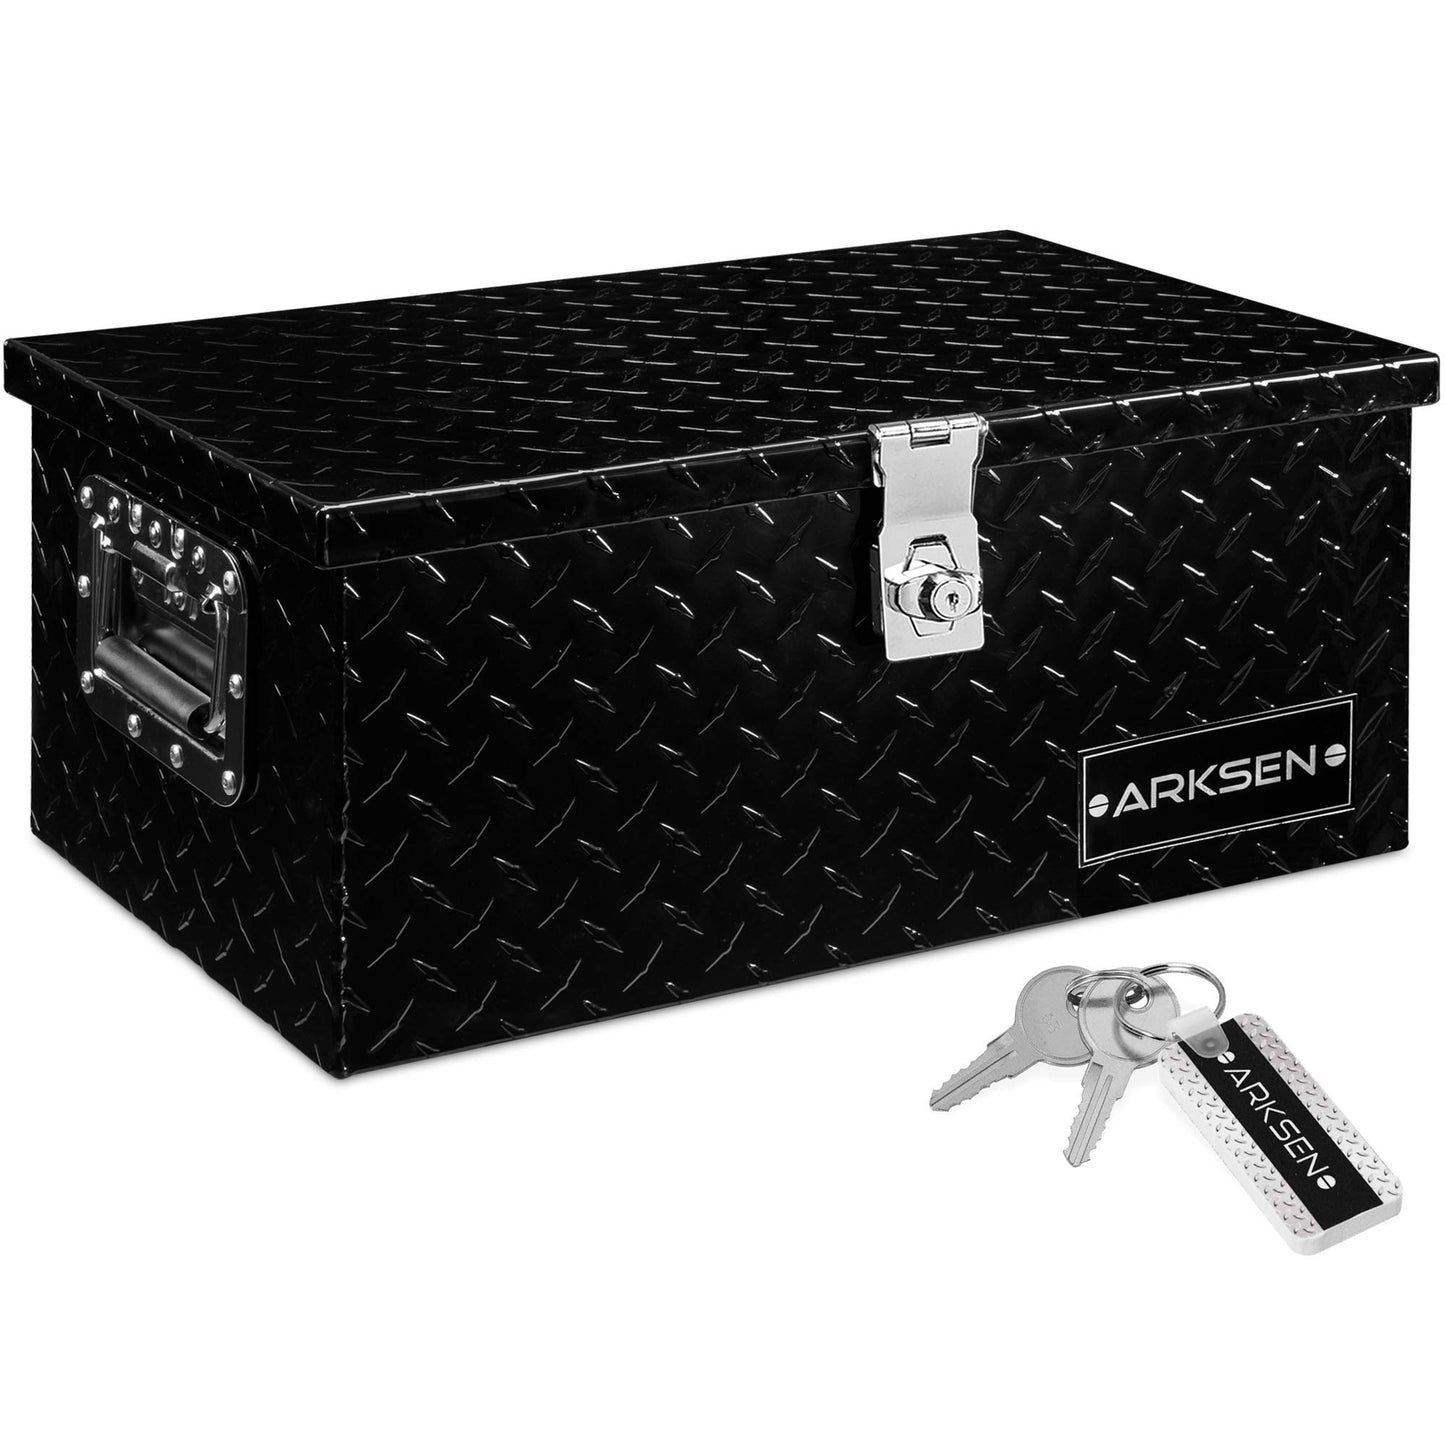 ARKSEN 20 Inch Heavy Duty Aluminum Diamond Plate Tool Box Chest Box Pick Up Truck Bed RV Trailer Toolbox Storage with Side Handle and Lock Keys –